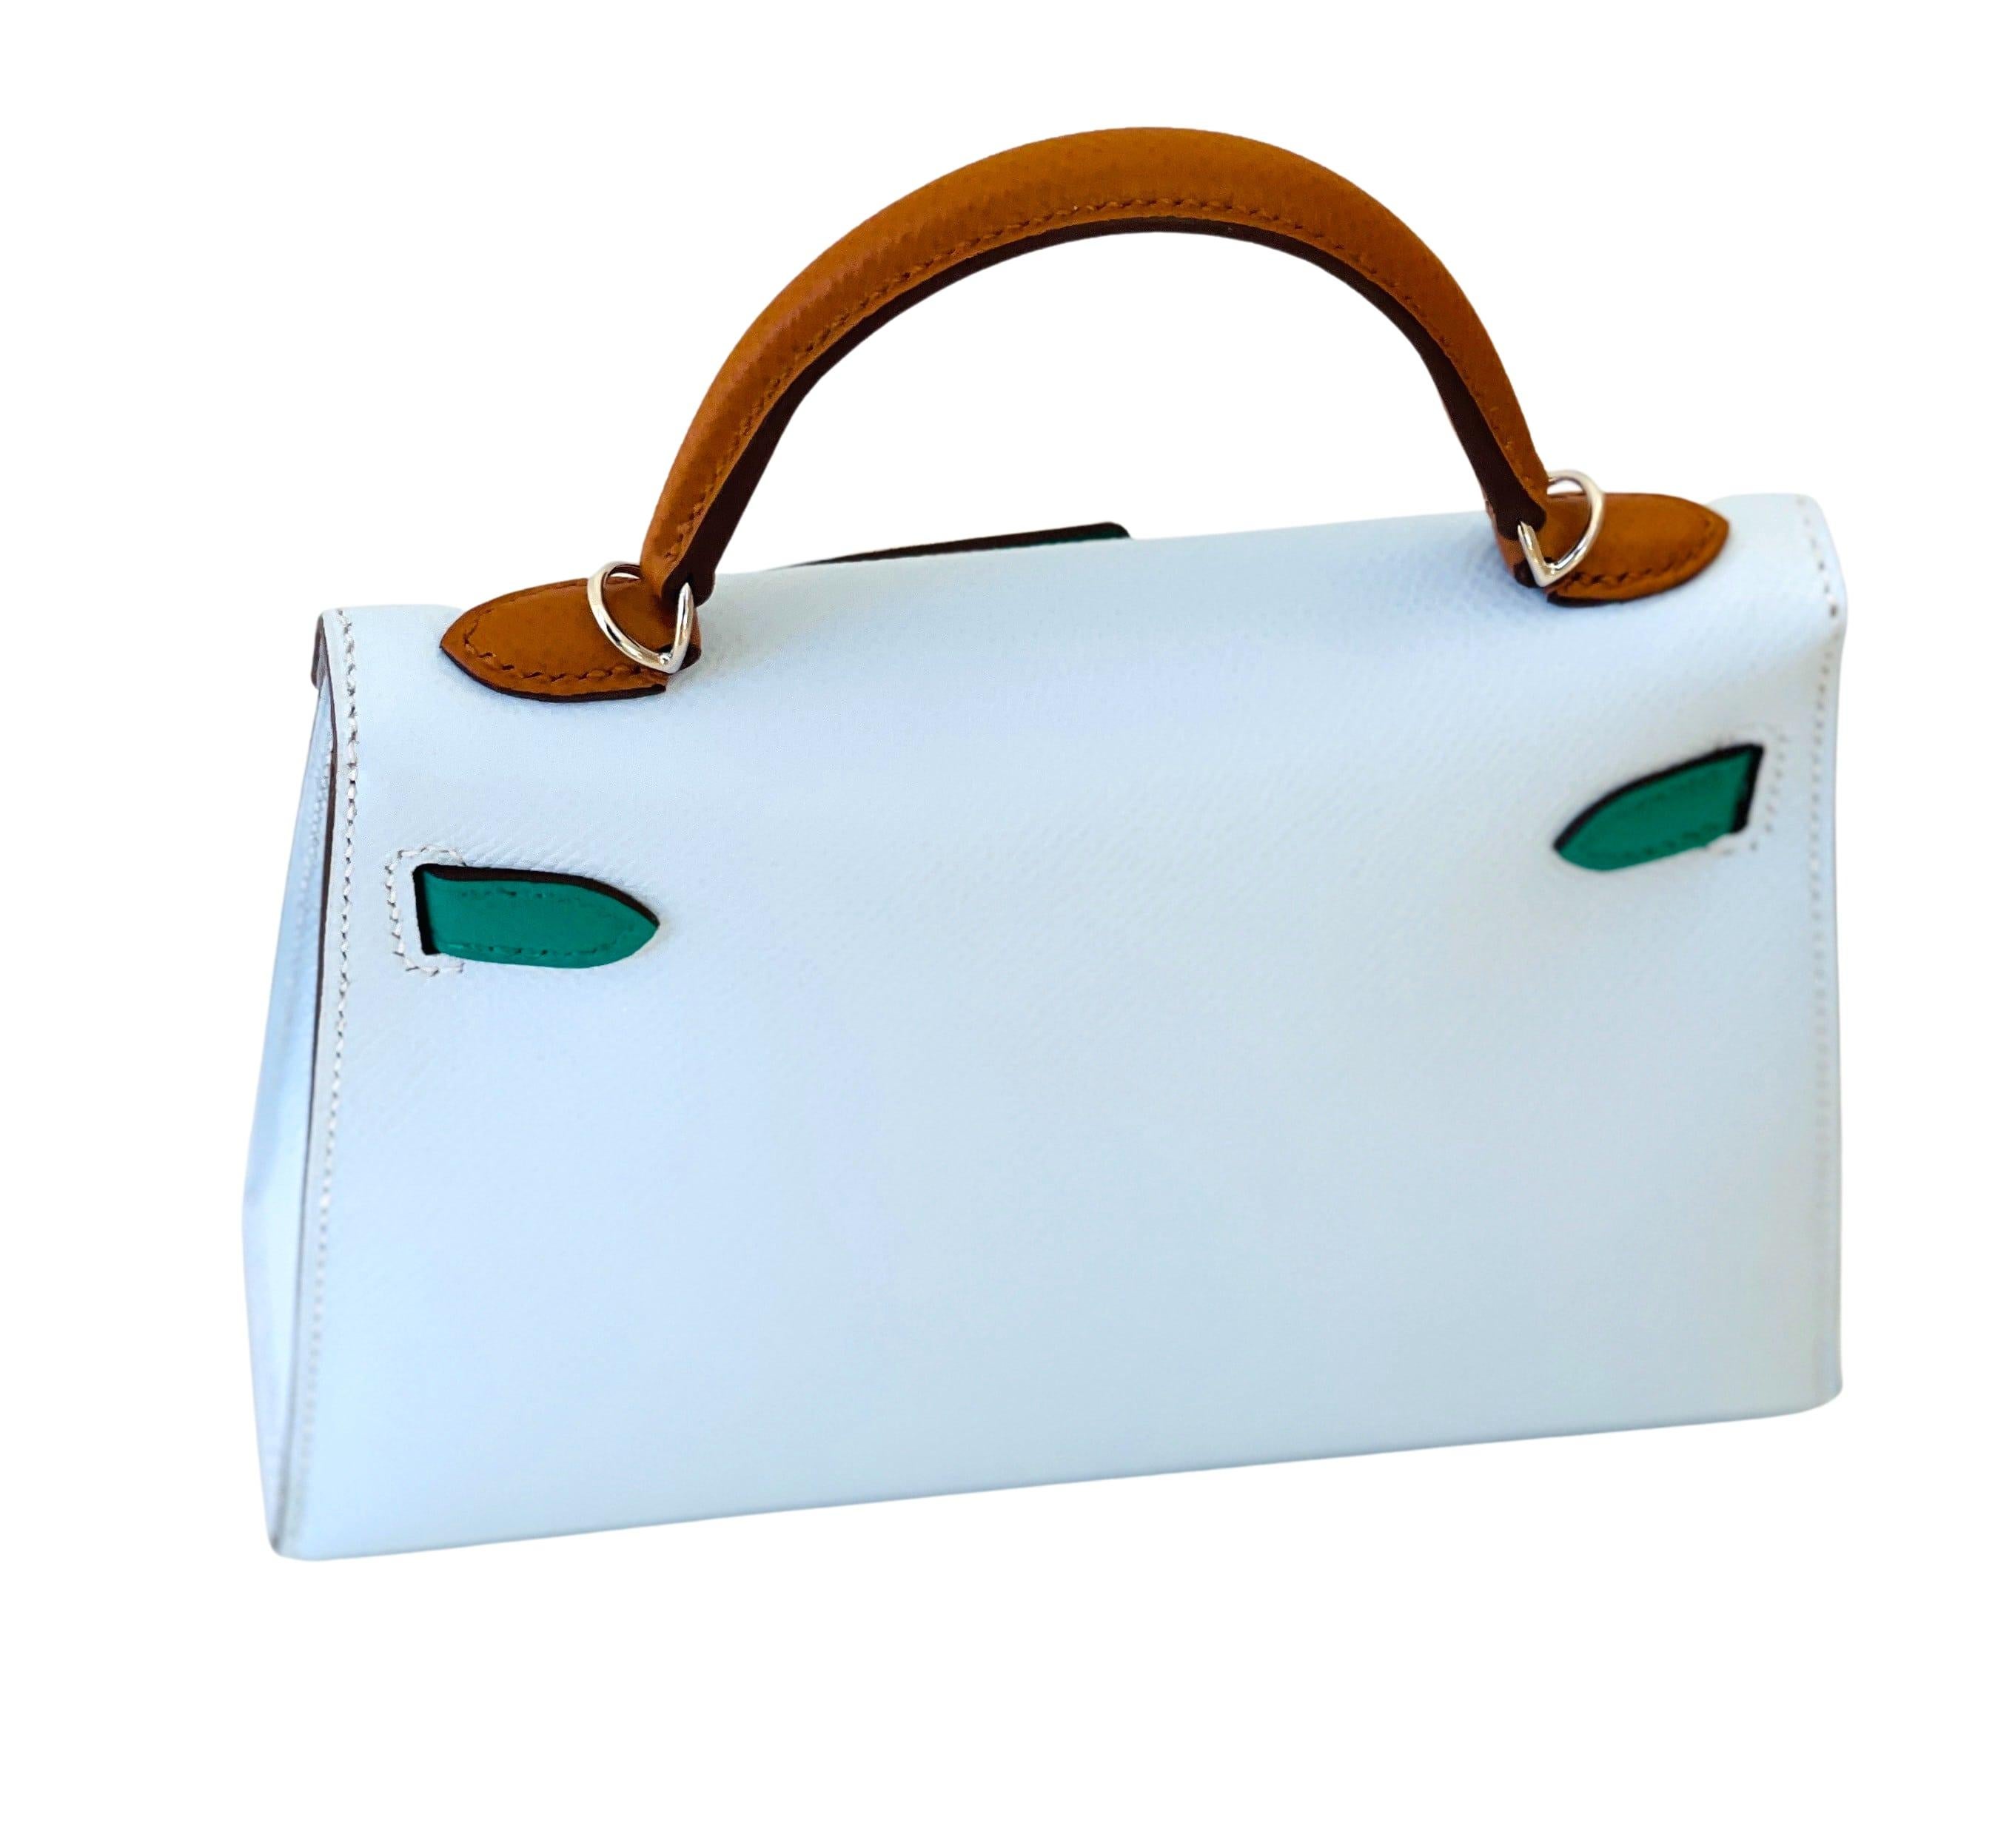 This Kelly, in the Sellier style, is in Blue Brume, Vert Jade and Gold epsom with palladium hardware and has tonal stitching, two straps with front toggle closure, clochette with lock and two keys, single rolled handle and removable shoulder